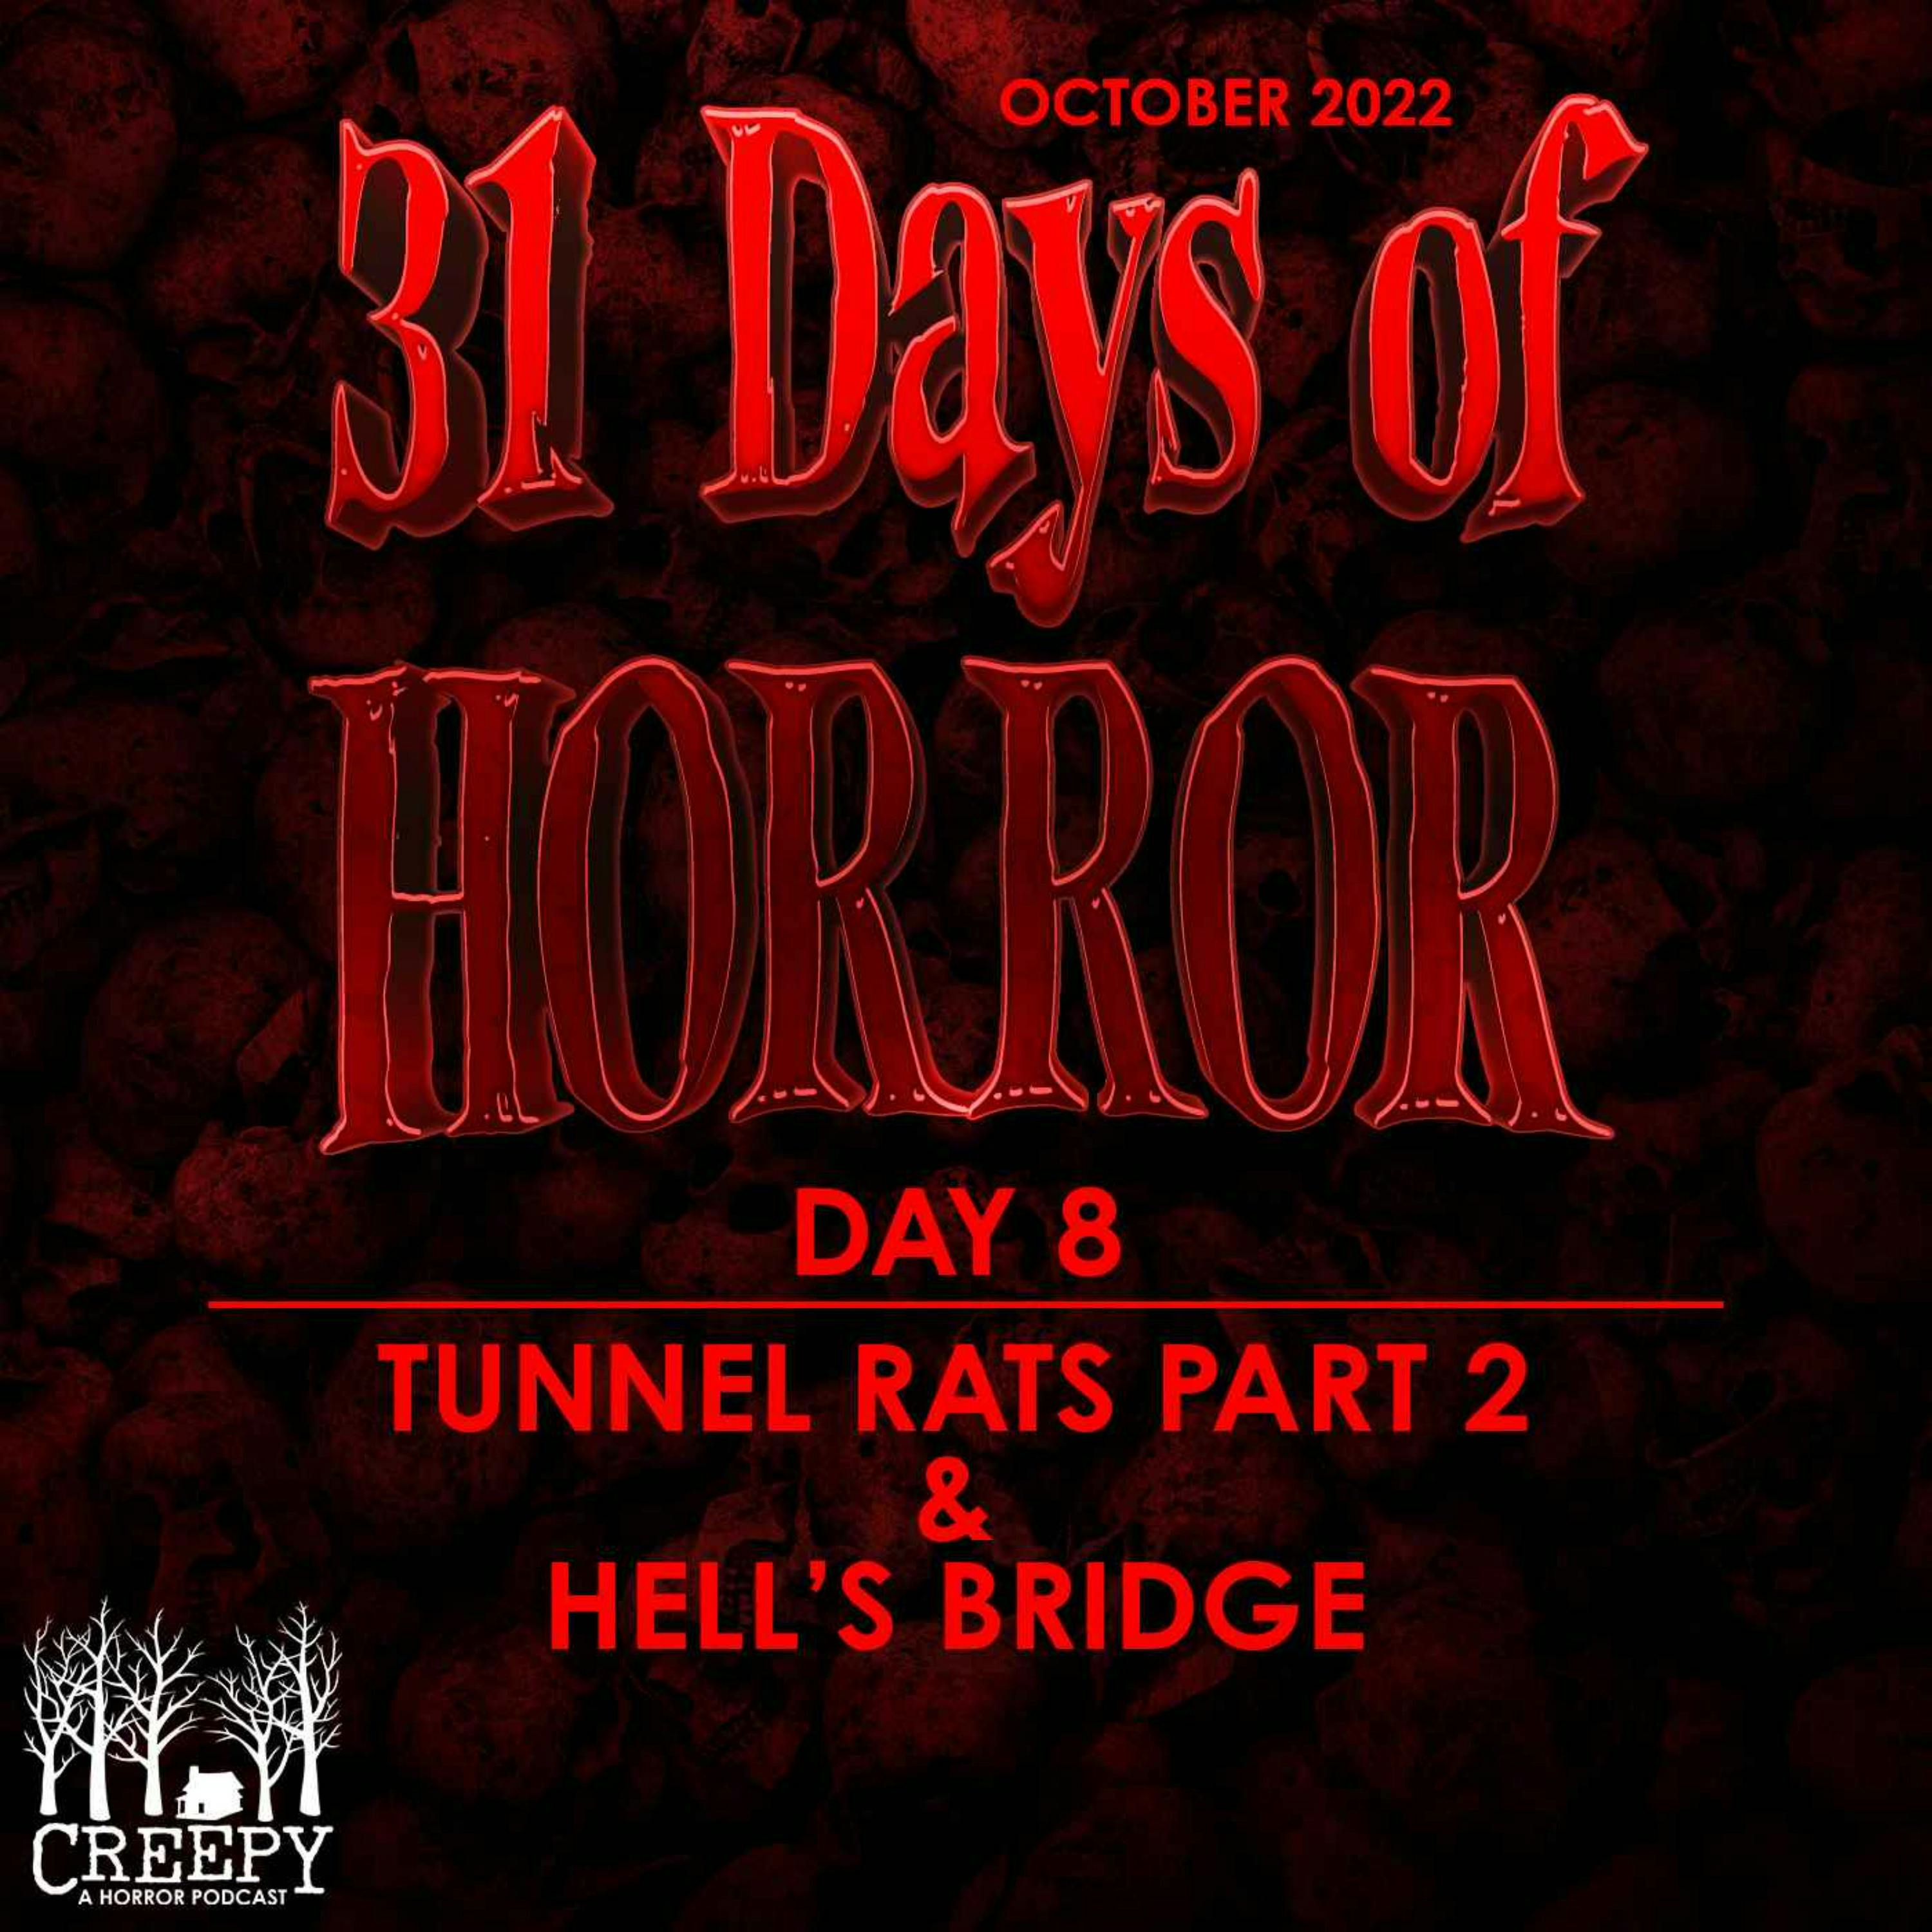 Day 8 - Tunnel Rats Part 2 & Hell’s Bridge